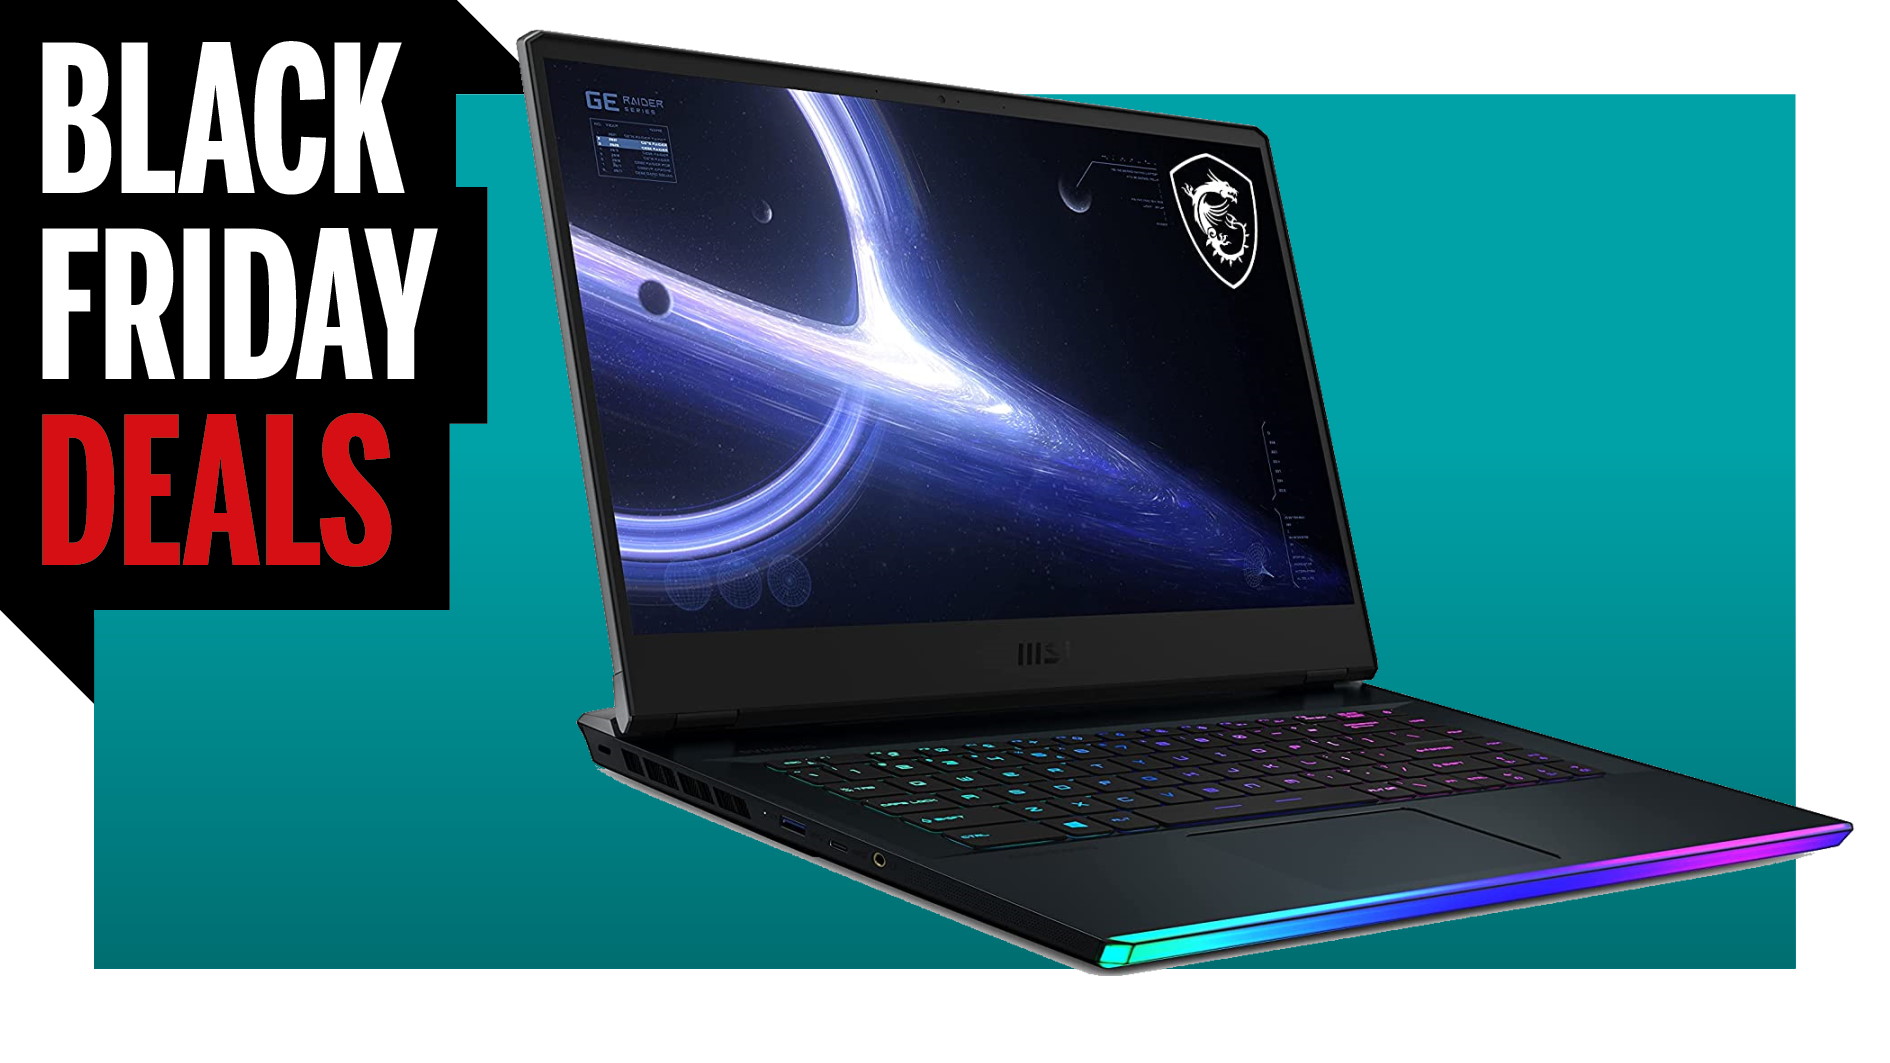 If You Want A Beefy Laptop And Don't Care How Much It Costs, Check Out This Beast From MSI thumbnail